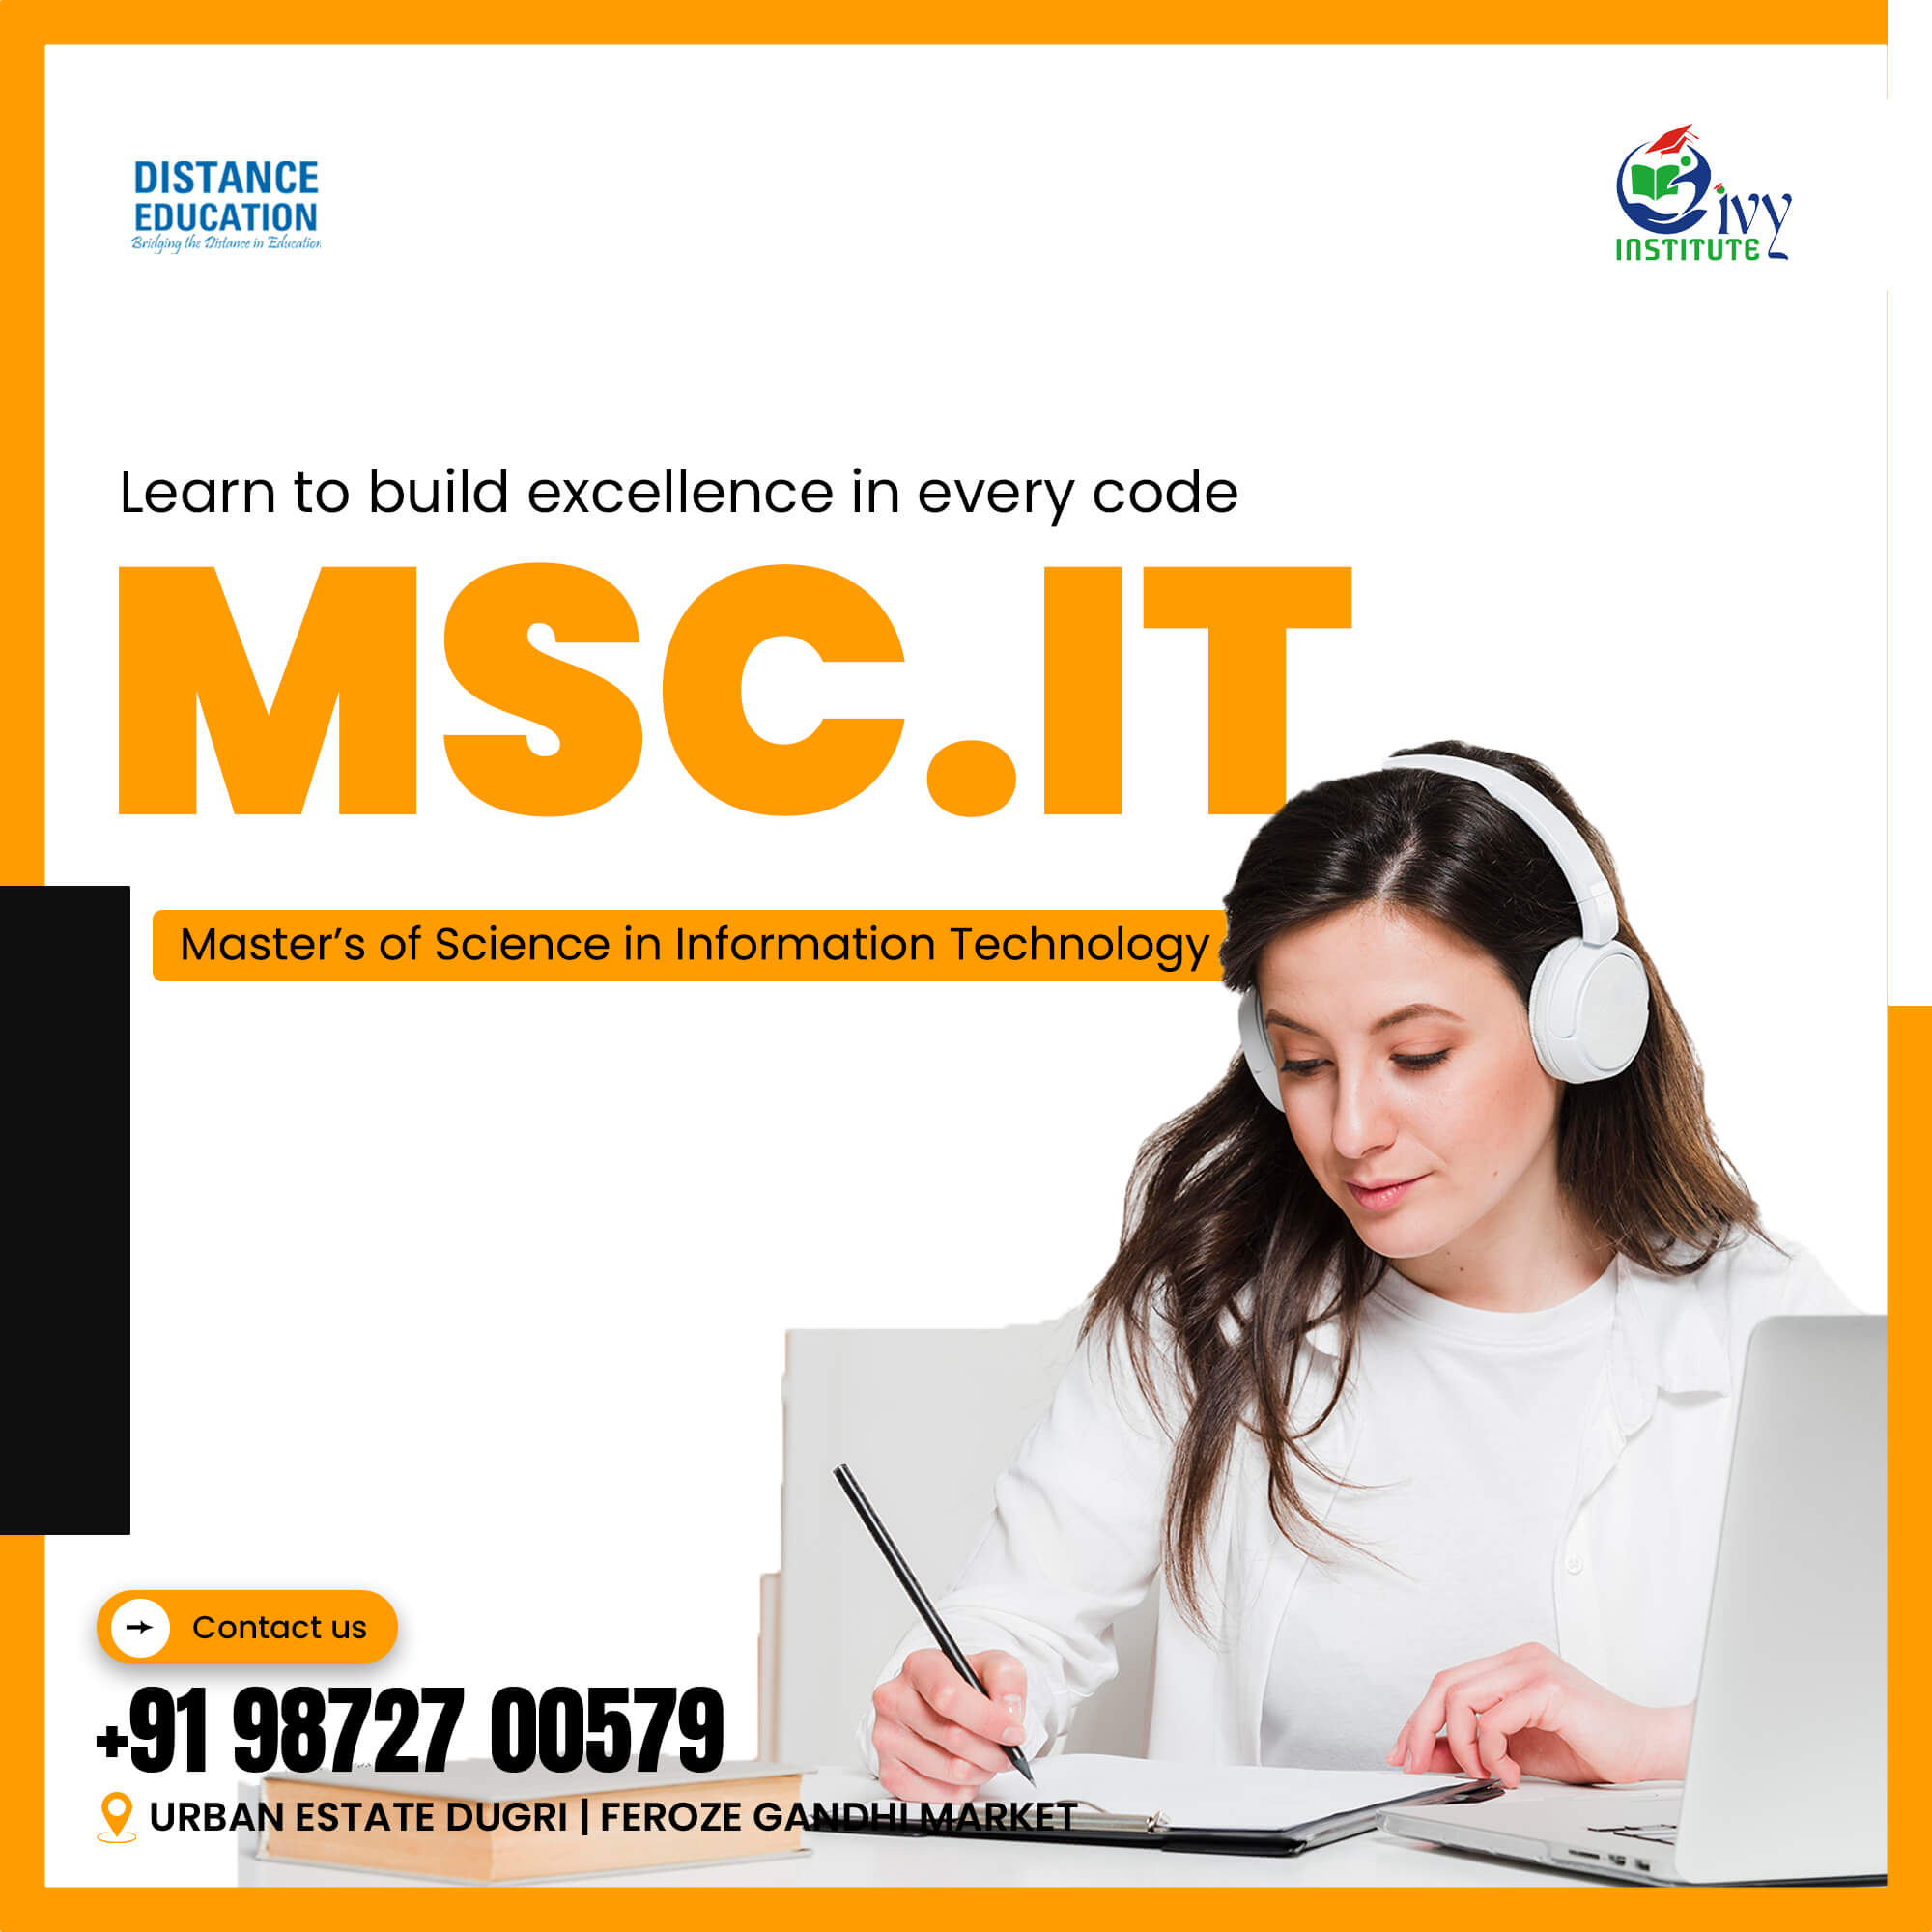 Join MSc IT at IVY Institute